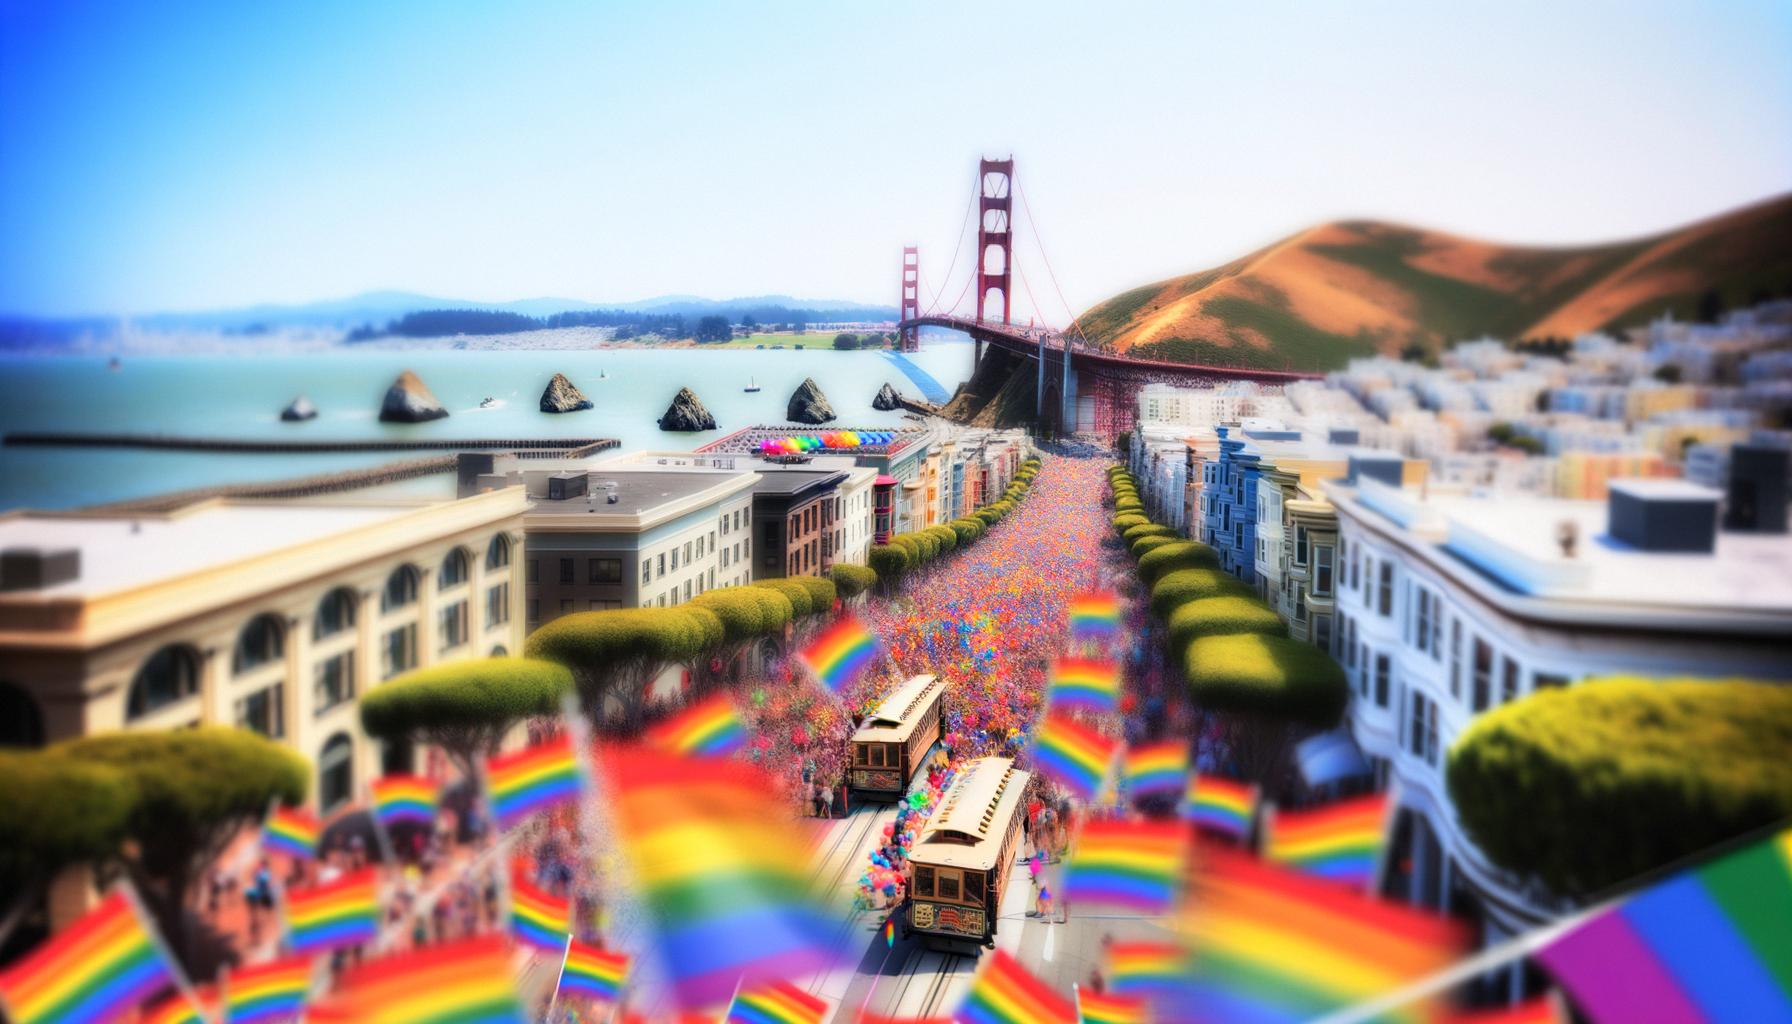 San Francisco hosts largest annual Pride celebration in the United States